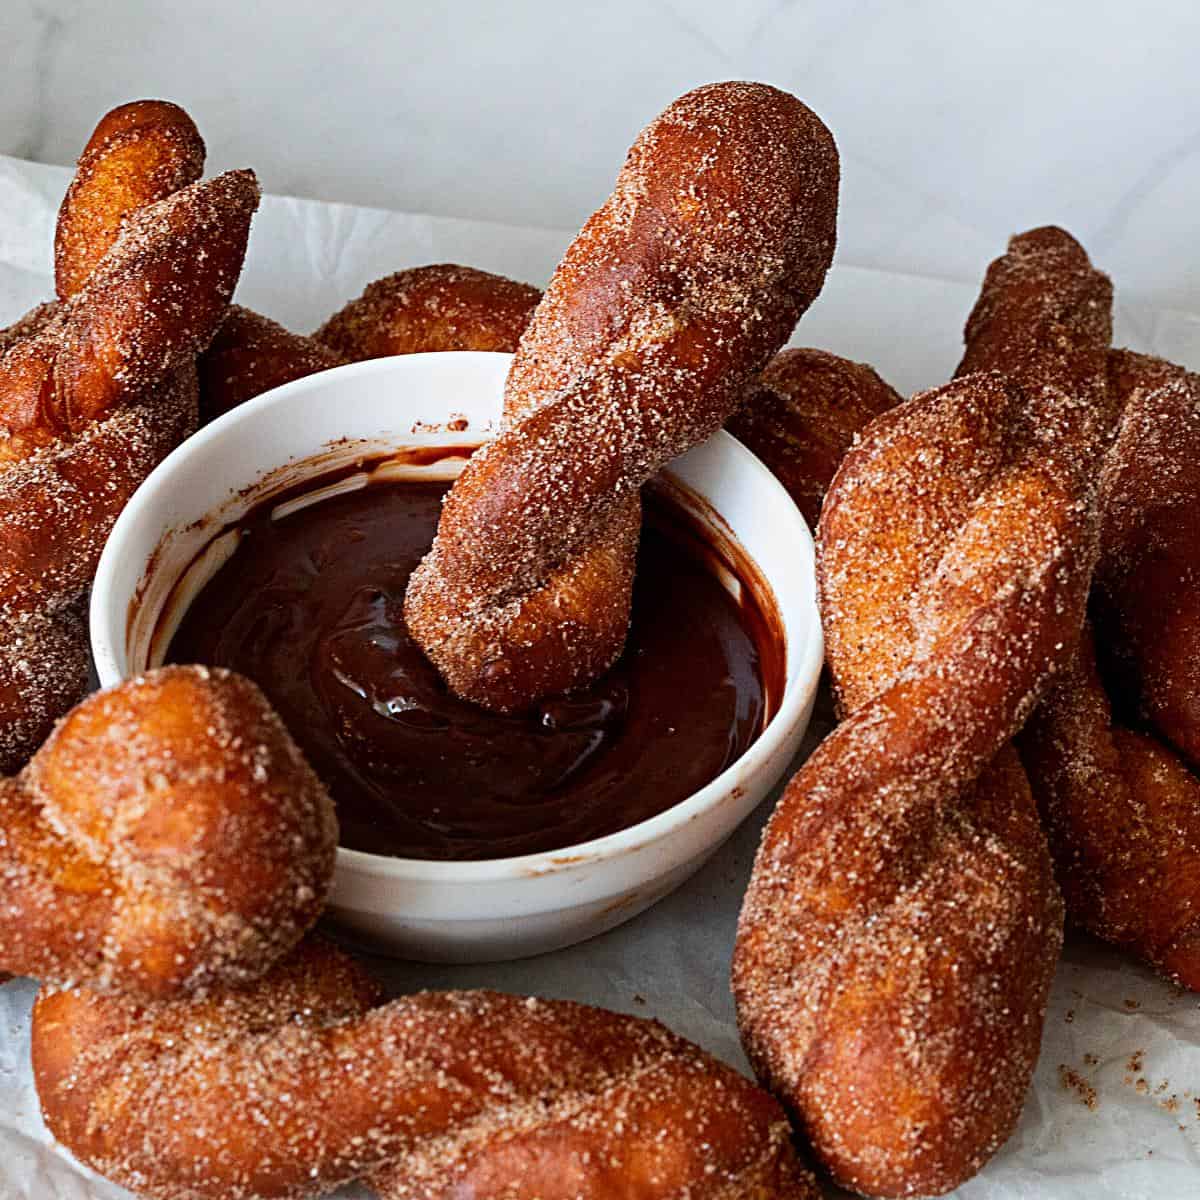 Chocolate sauce and twisted fried donuts.